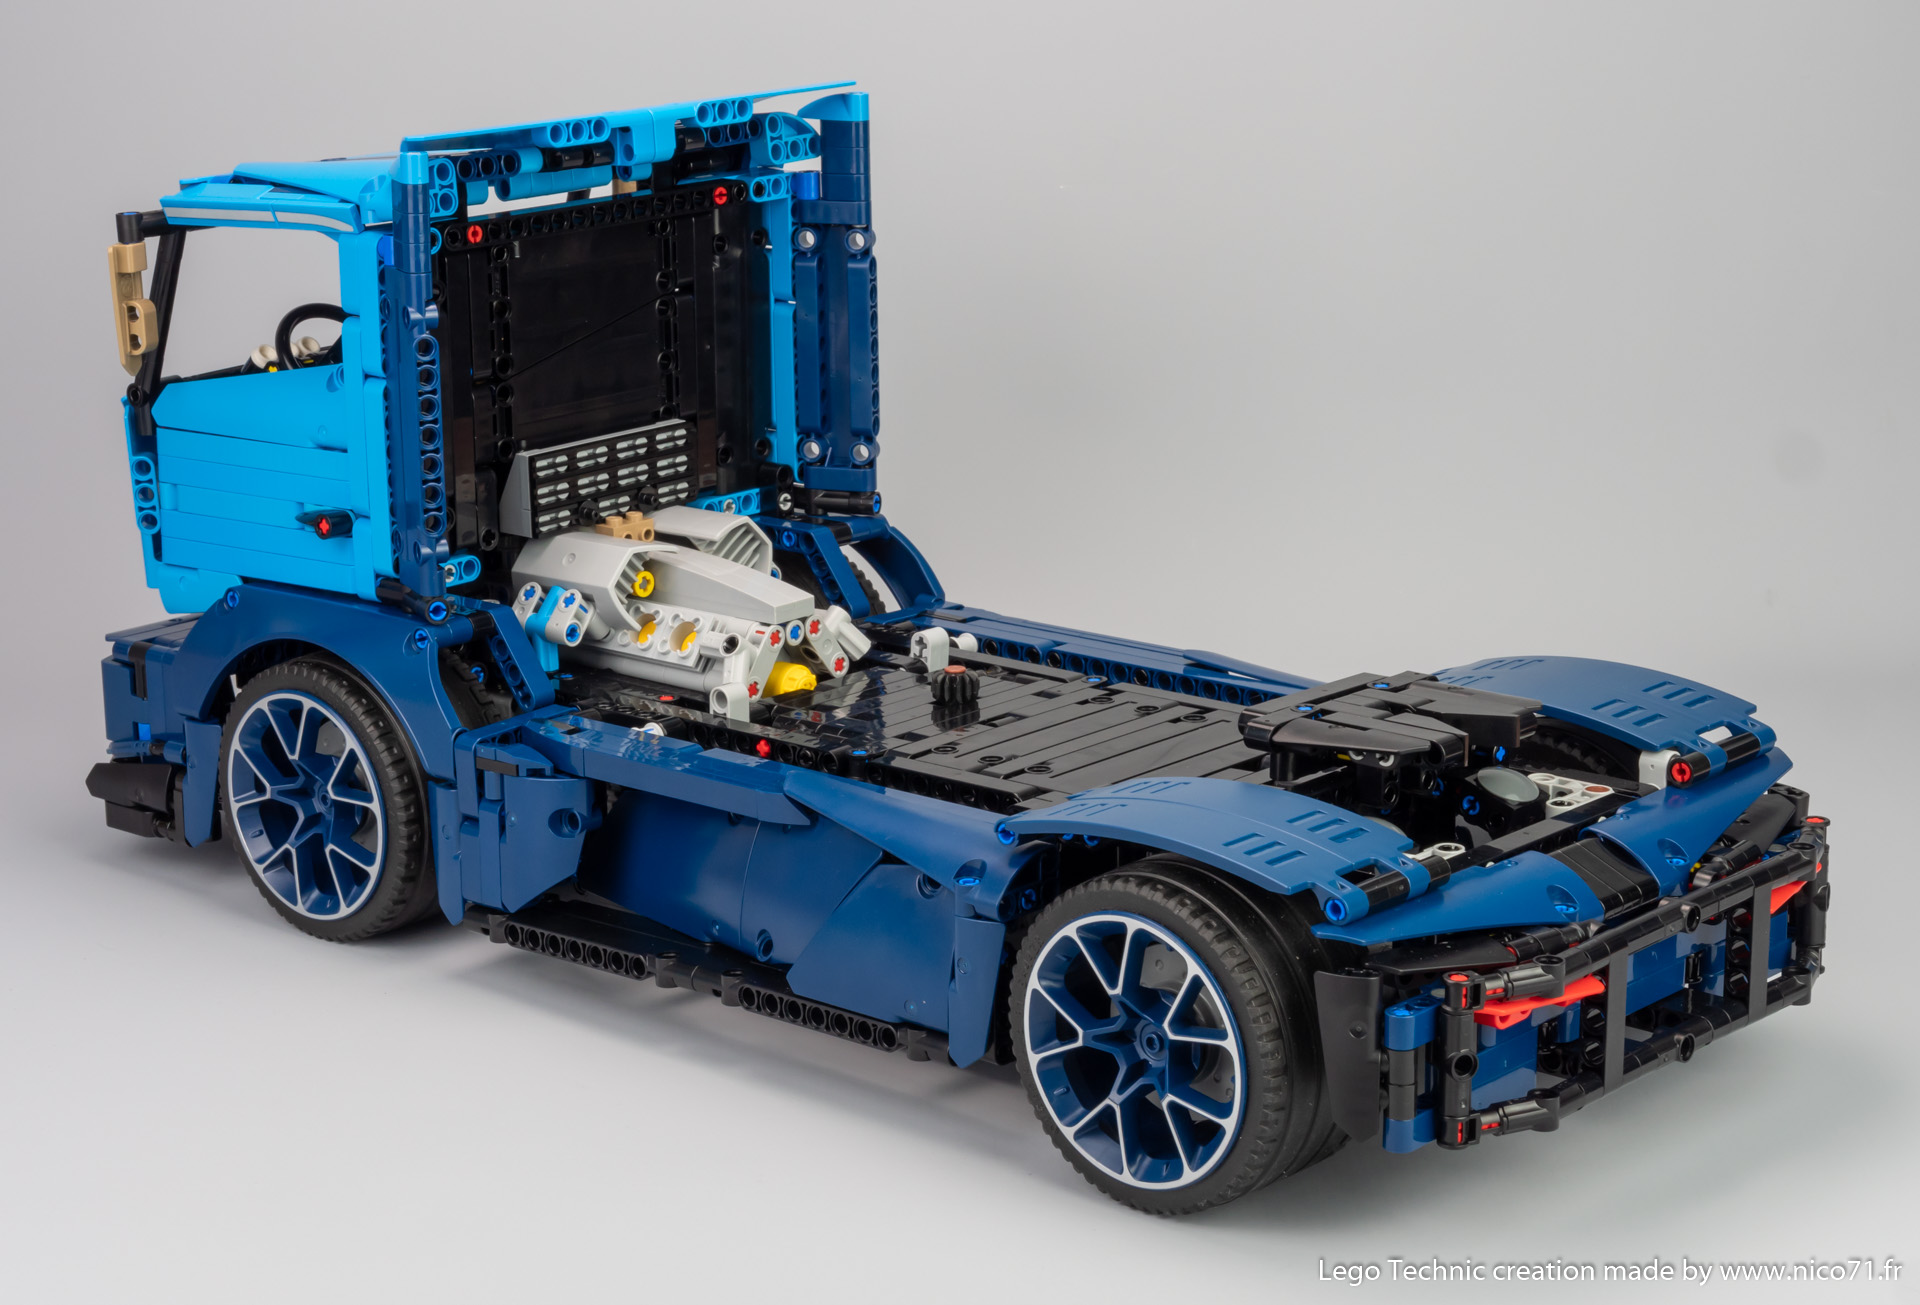 LEGO MOC 42083 B - Truck by Nico71 | Rebrickable Build with LEGO